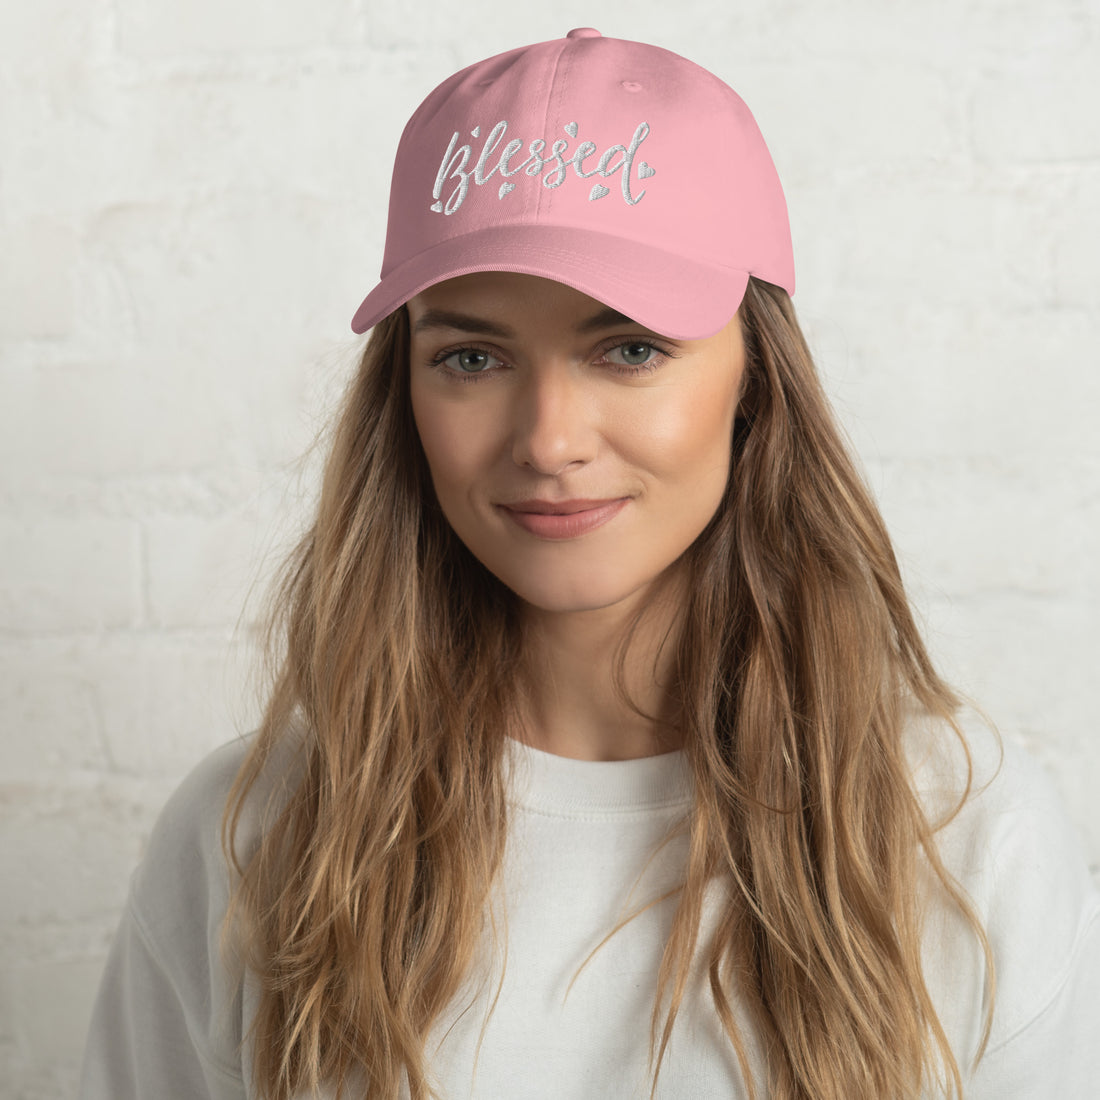 “Blessed” Hat